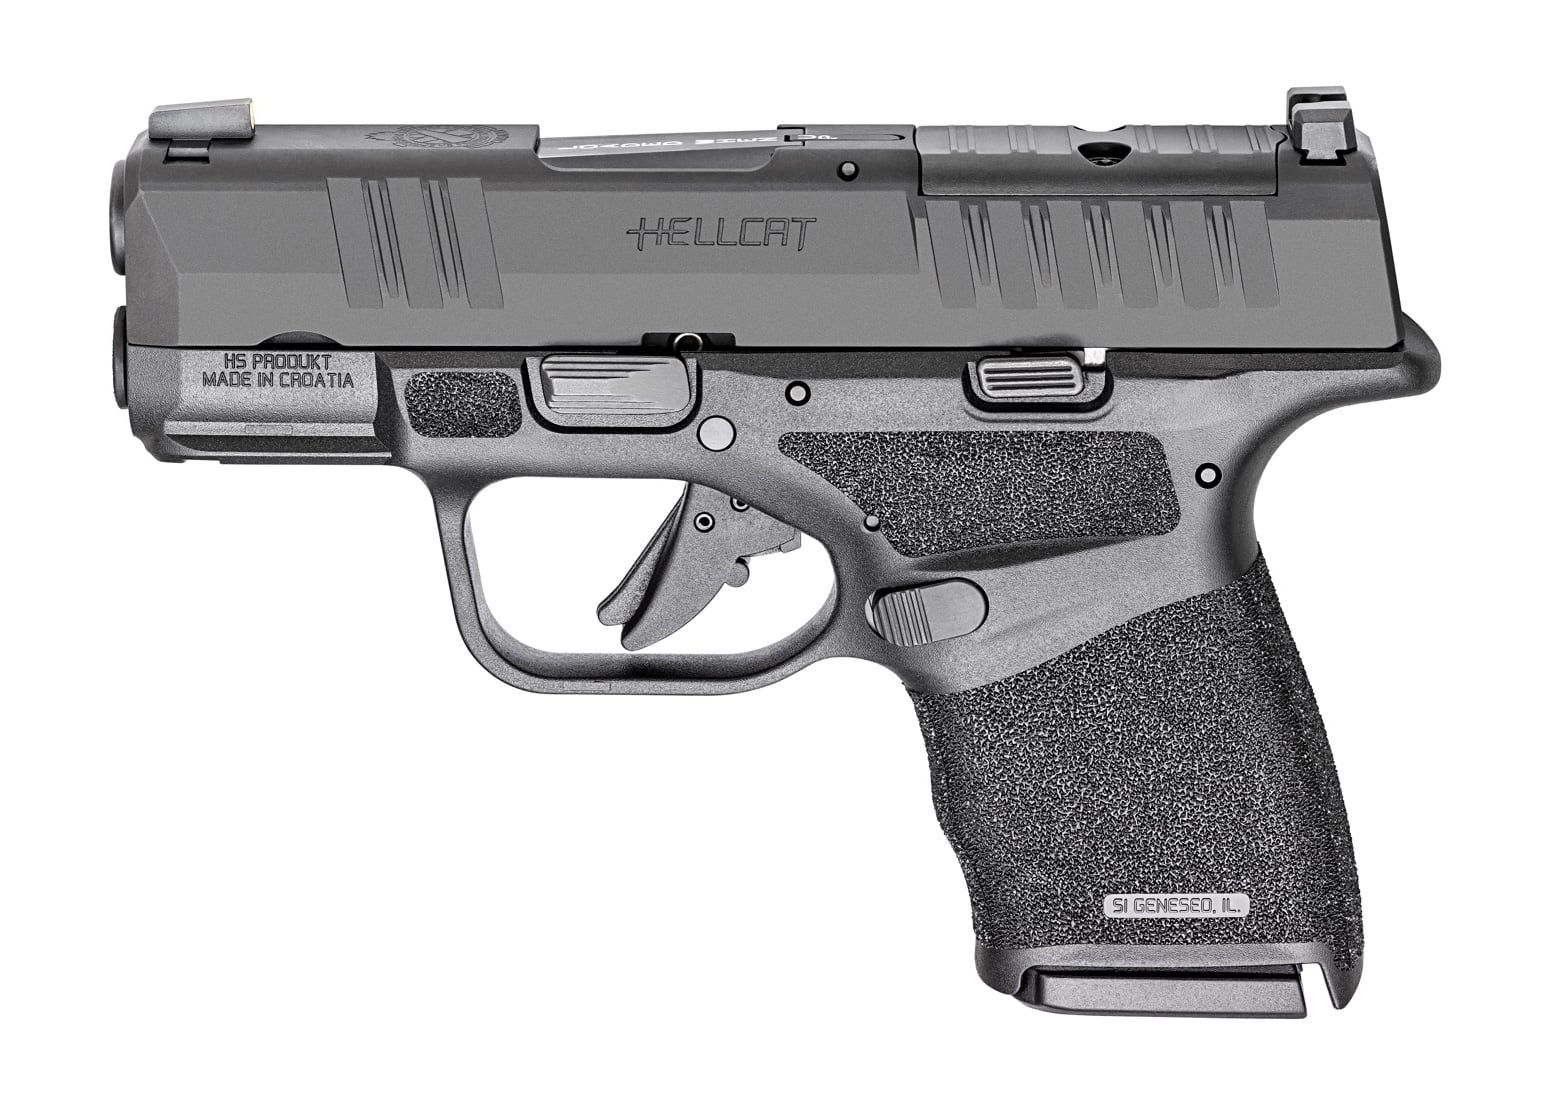 In this photo we see a left side profile of the Springfield Armory Hellcat 9mm pistol with the CA DOJ handgun requirements. Of all the handguns for sale in California, this one is one of the best. It has an optics cut for a red dot making it more likely you will hit only the intended target. Likewise, the Adaptive Grip Texture helps you to maintain control of the handgun when shooting. The modifications made to the gun include the loaded chamber indicator at the top of the slide. Compared to a Ruger, Beretta or Kimber, this pistol is the best choice when shopping — no asterisk in sight.